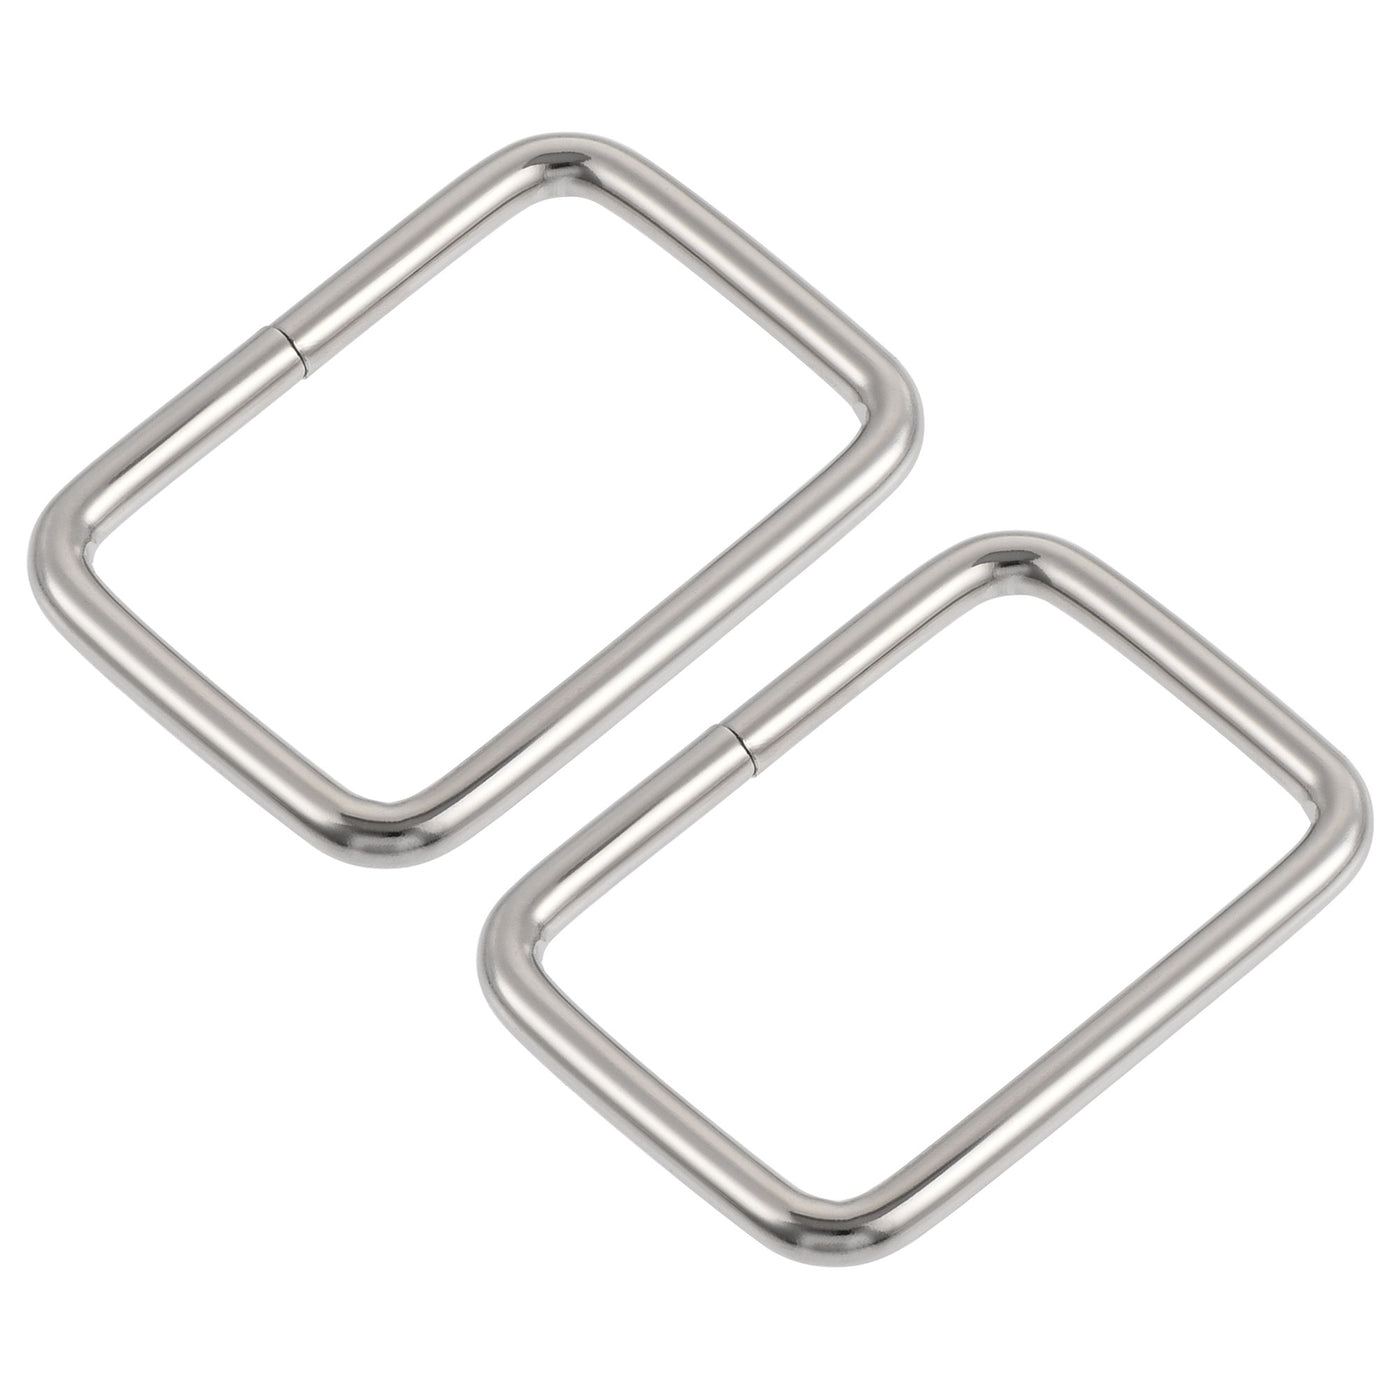 uxcell Uxcell Metal Rectangle Ring Buckles 38.8x25mm for Bags Belts DIY Silver Tone 30pcs